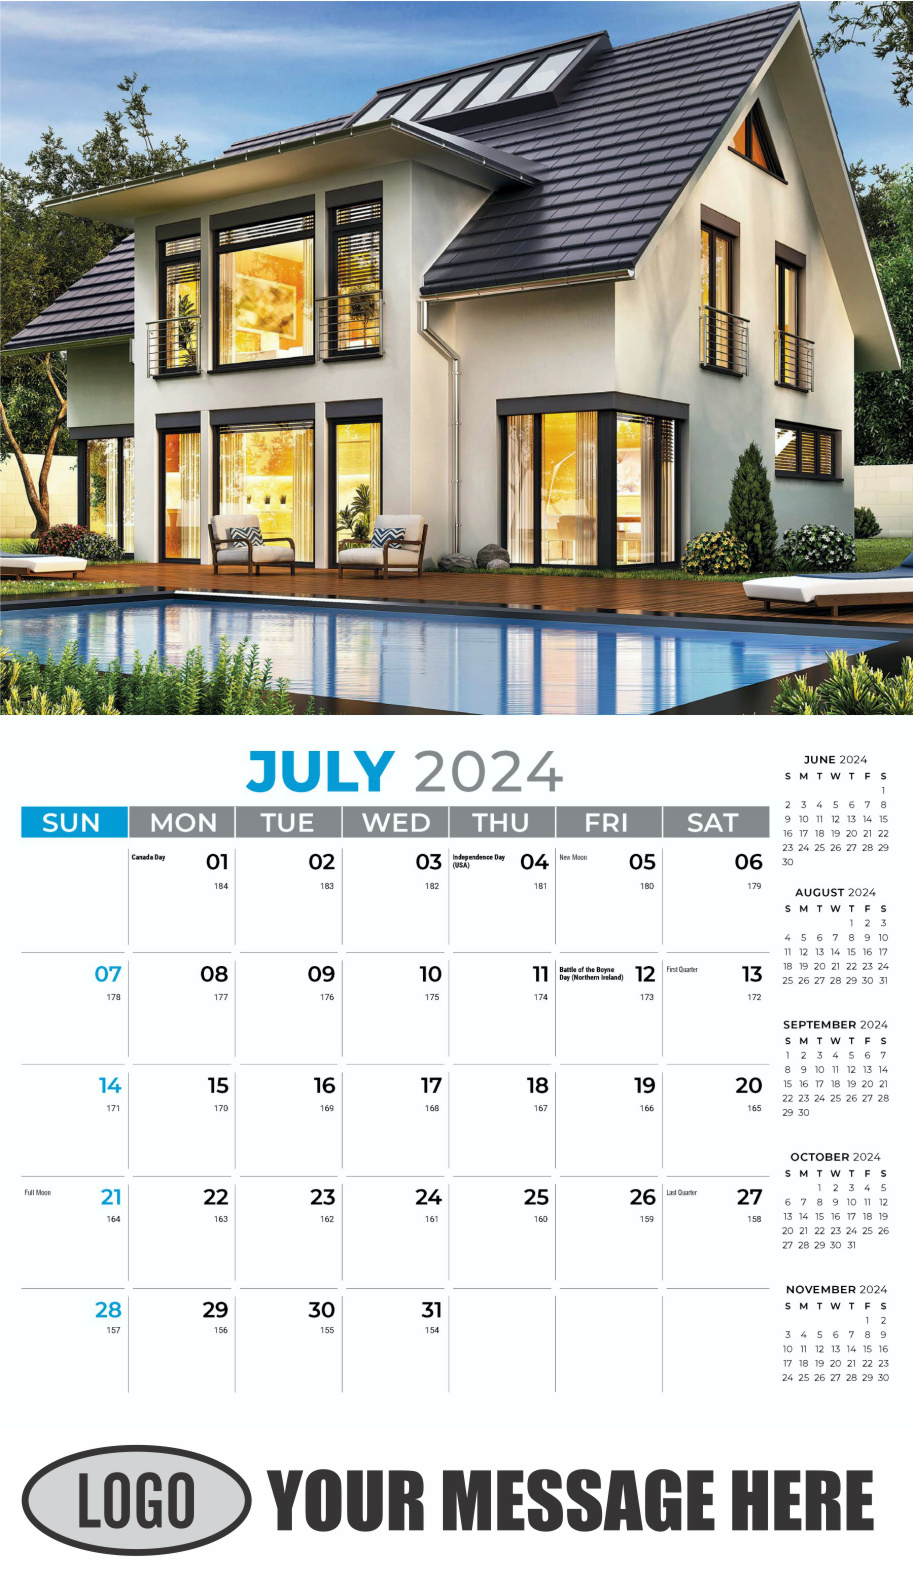 Luxury Homes 2024 Real Estate Agent Promotional Wall Calendar - July